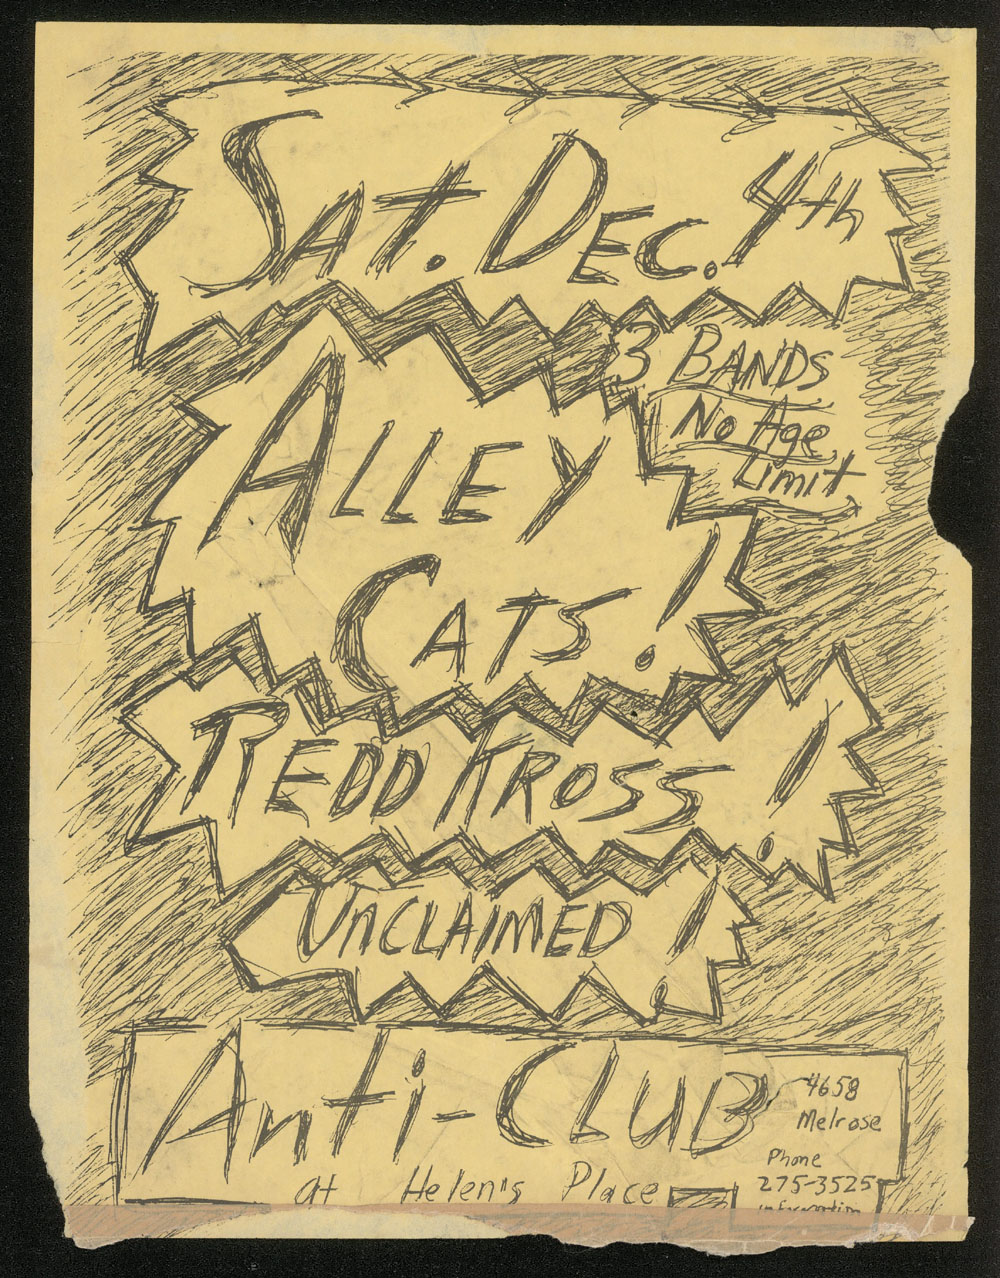 ALLEY CATS w/ Redd Kross, Unclaimed at Anti-Club